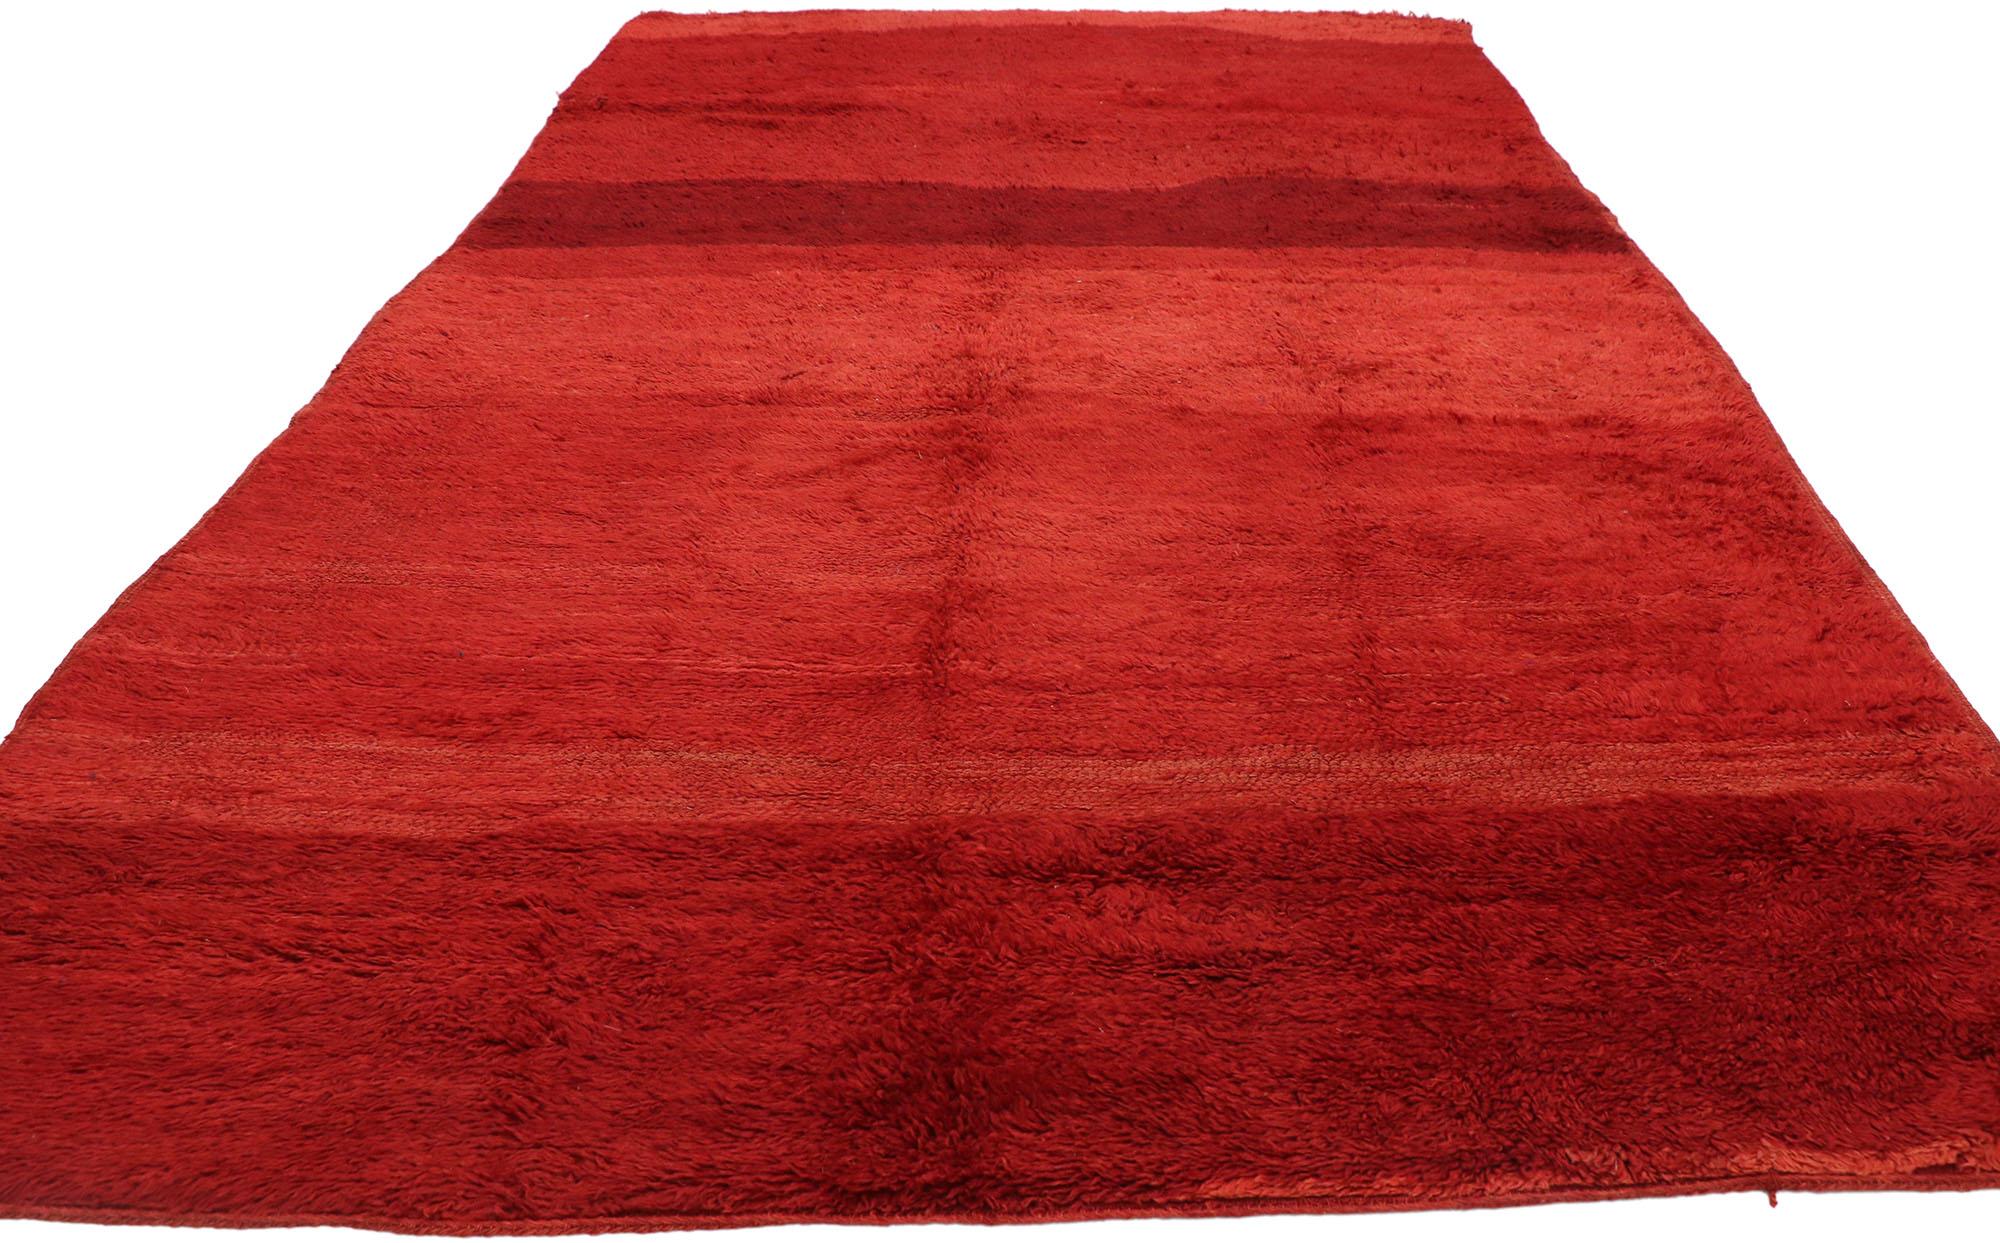 Bohemian Vintage Red Beni Mrirt Moroccan Rug, Midcentury Boho Meets Expressionist Style For Sale